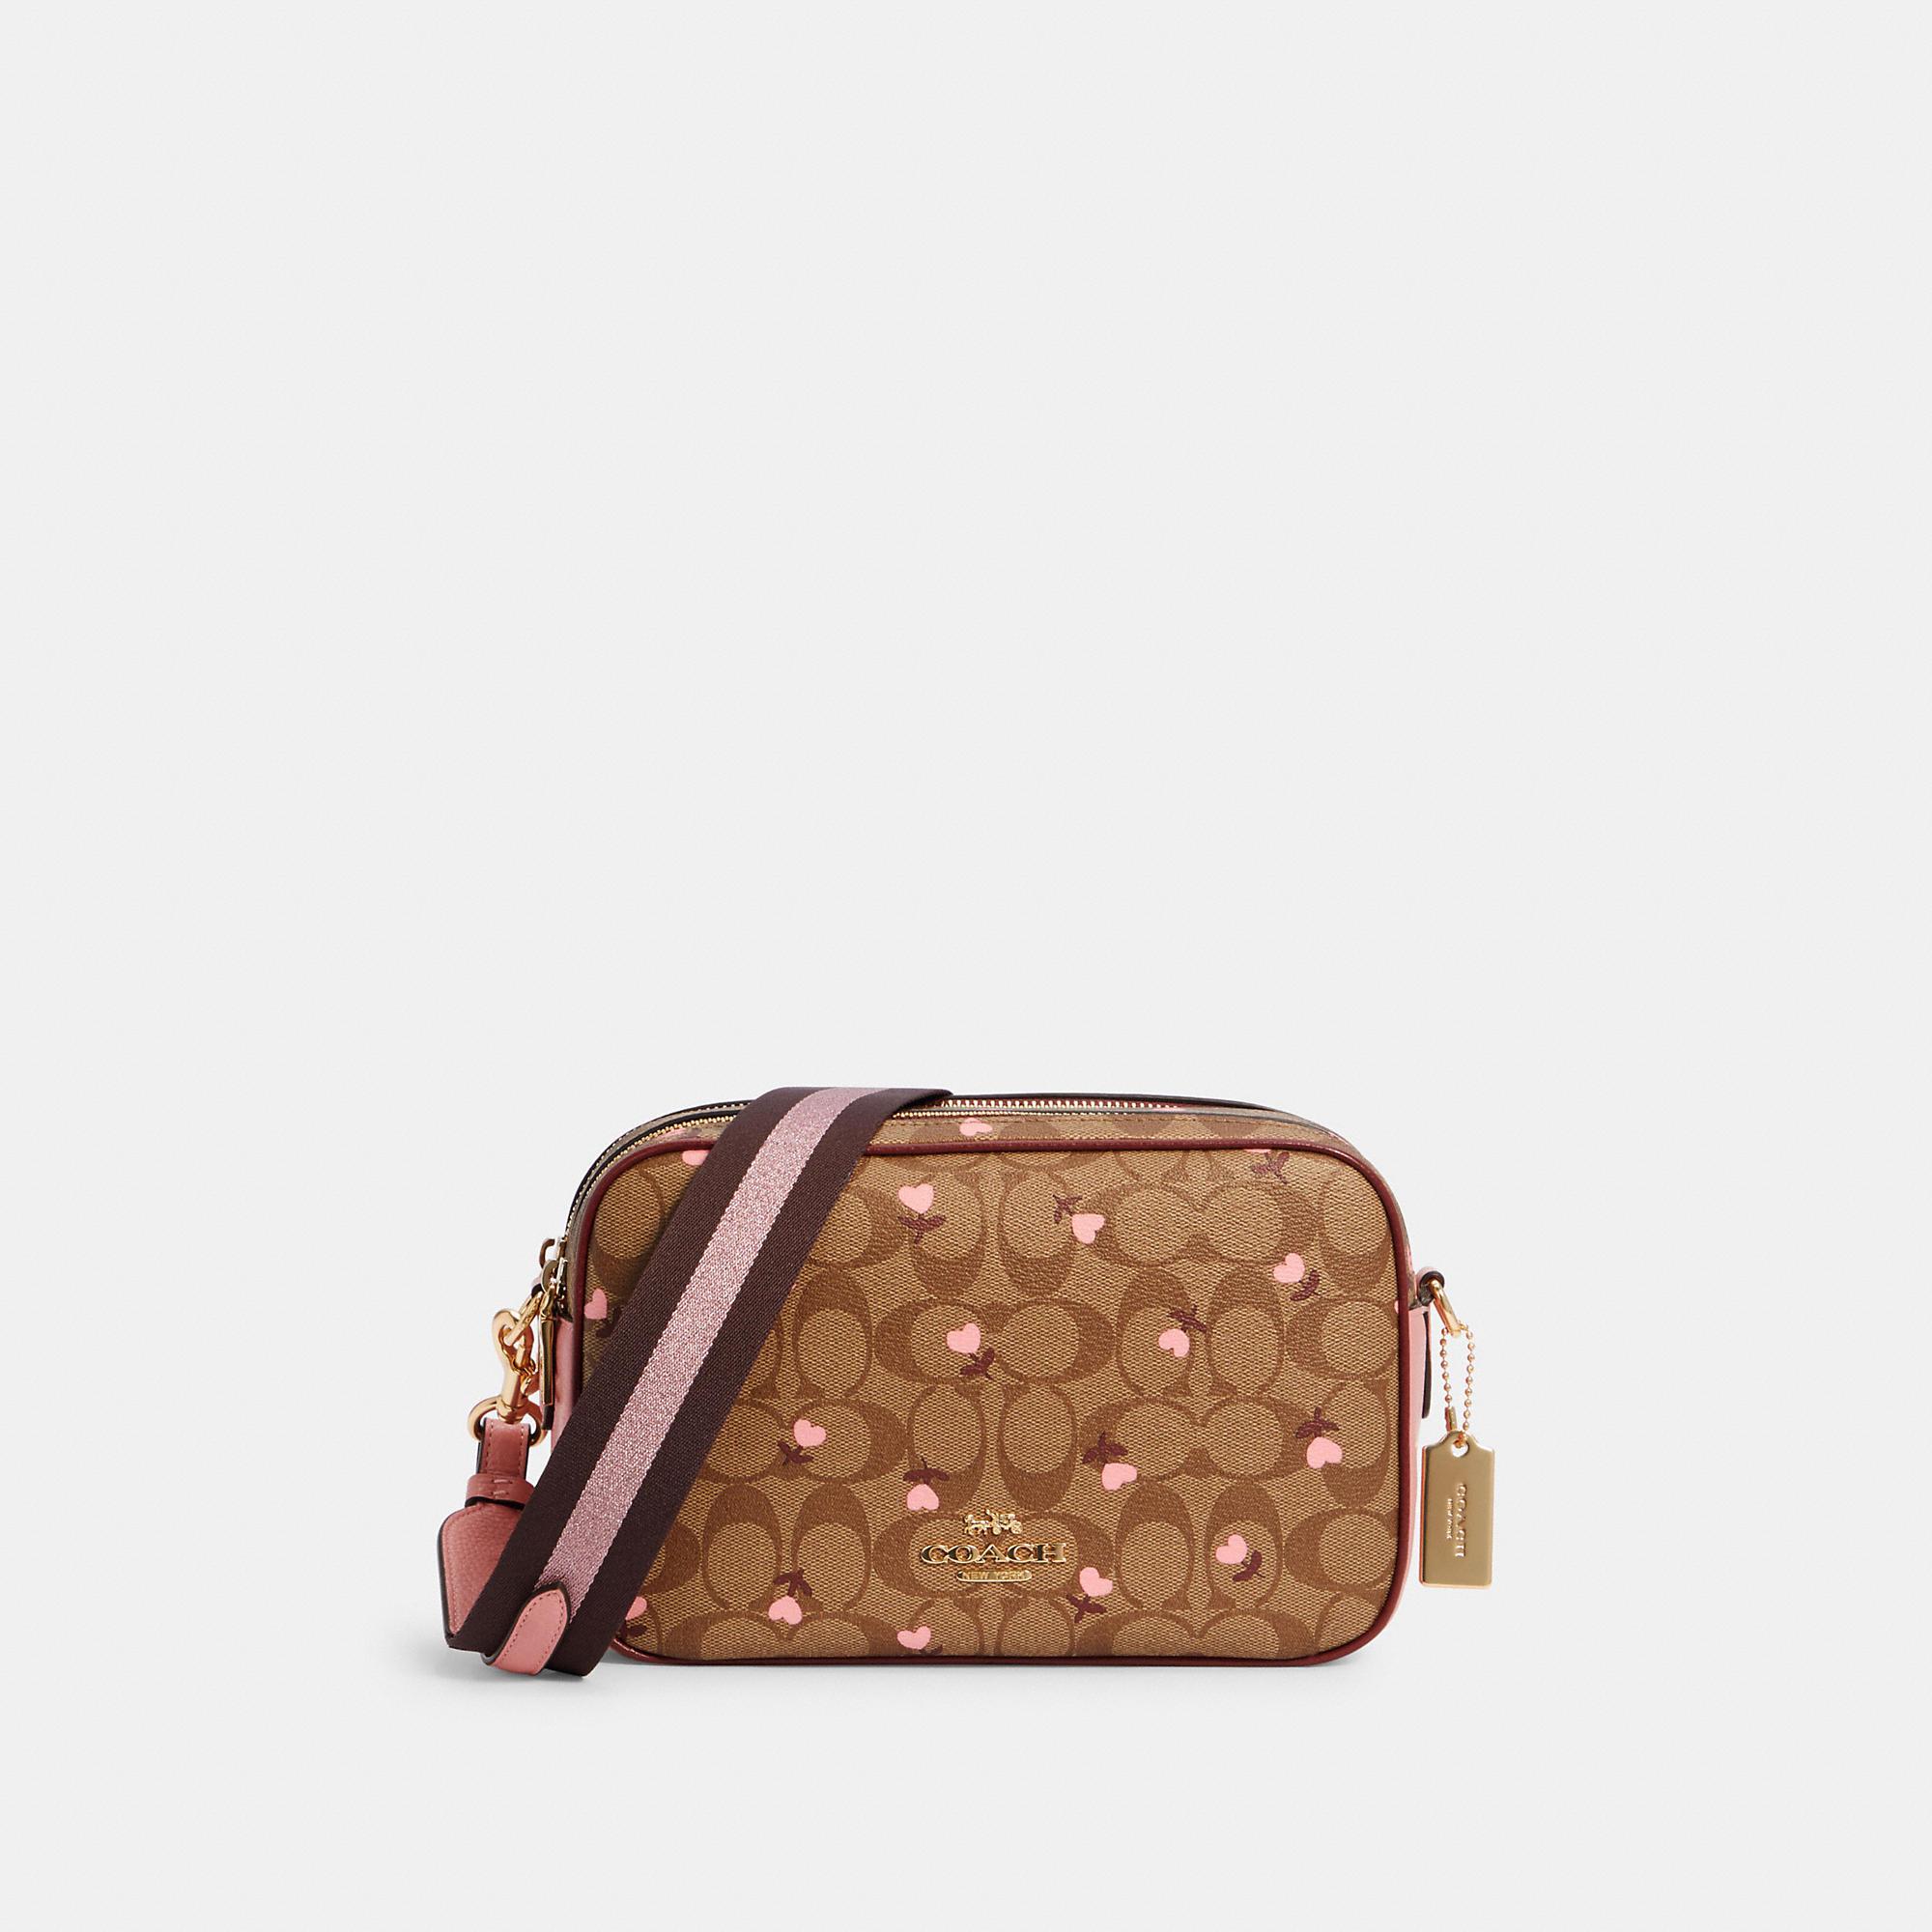 COACH Jes Crossbody Bag In Signature Canvas With Heart Floral Print